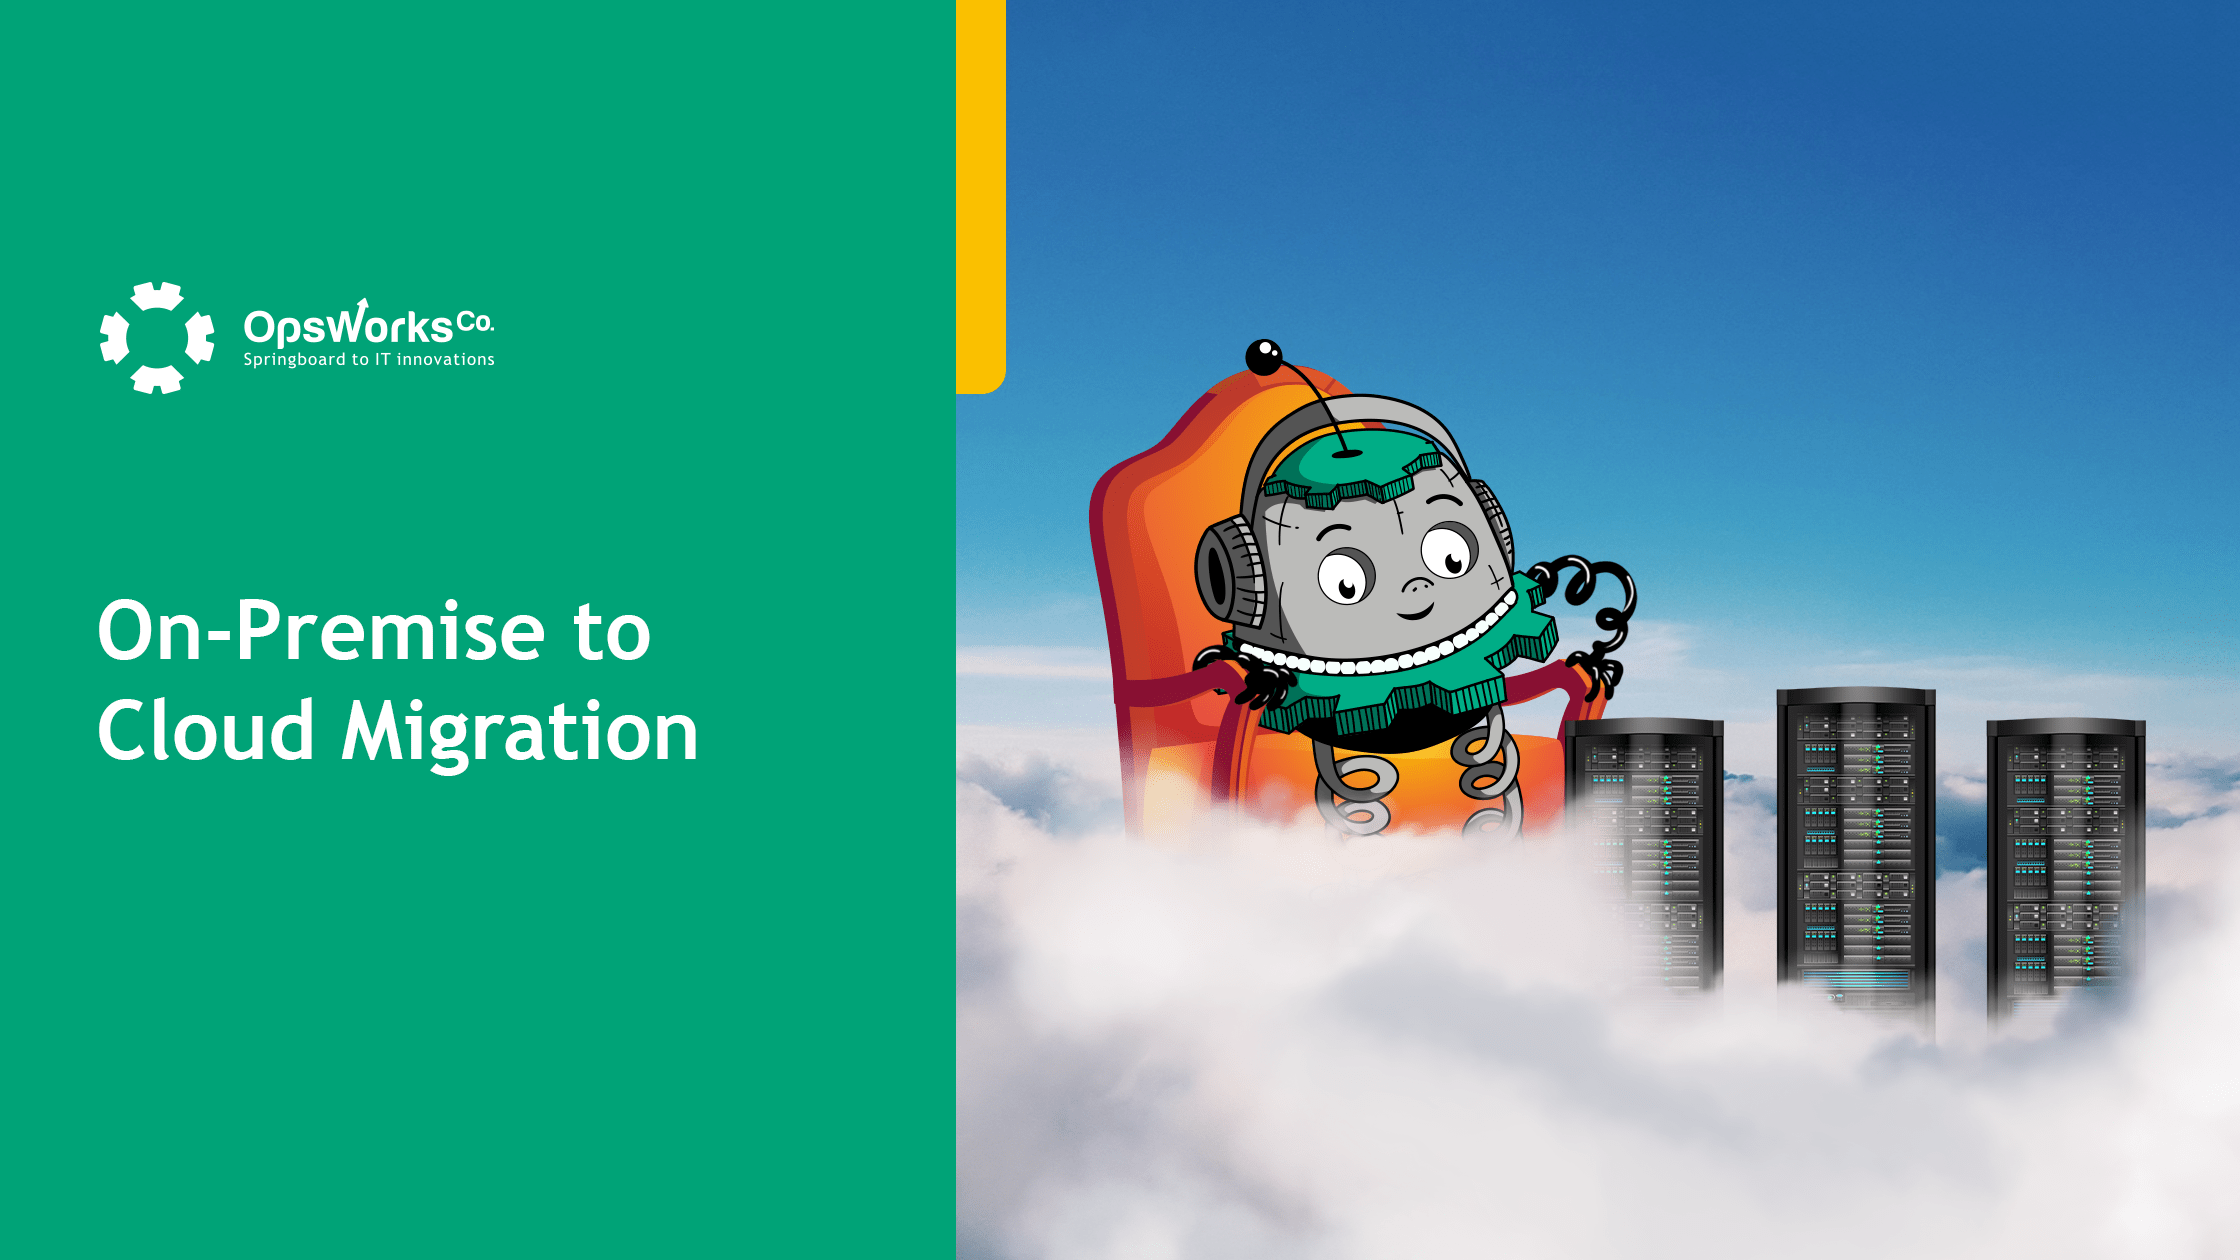 Step-by-step Guide on How to Conduct On-Premise to Cloud Migration